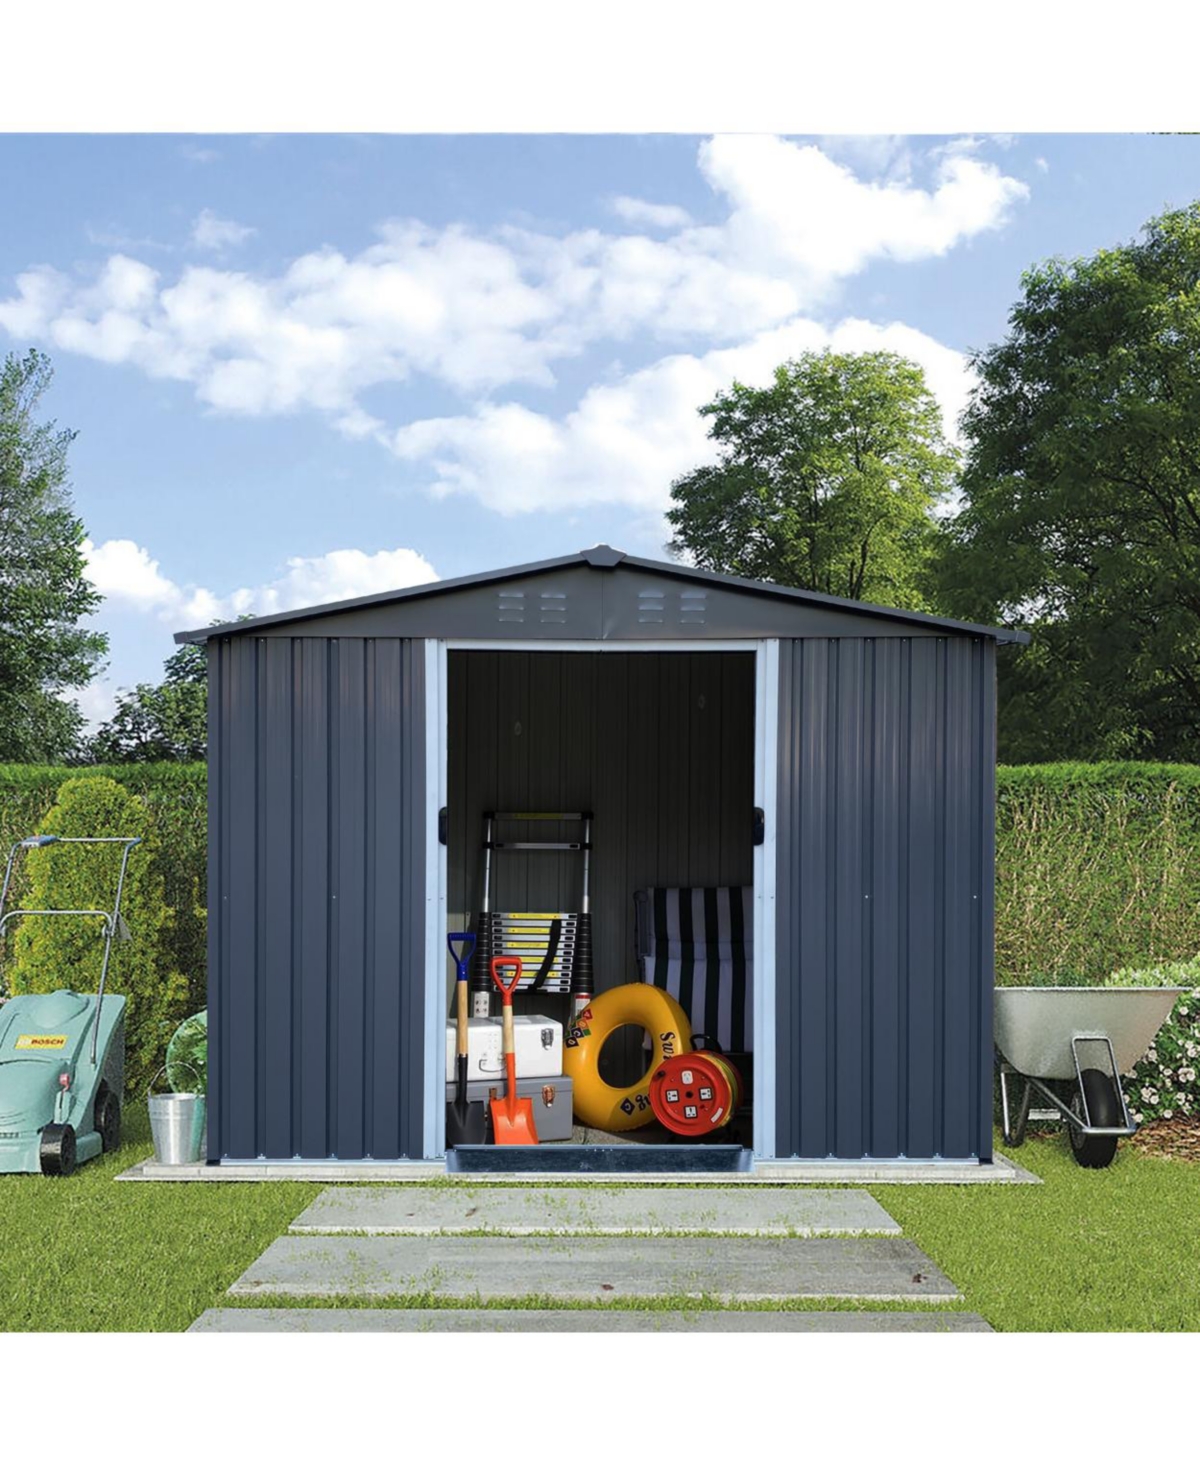 Outdoor Storage Shed 8 X 6 Ft Large Metal Tool Sheds, Heavy Duty Storage House Sliding Doors - Grey